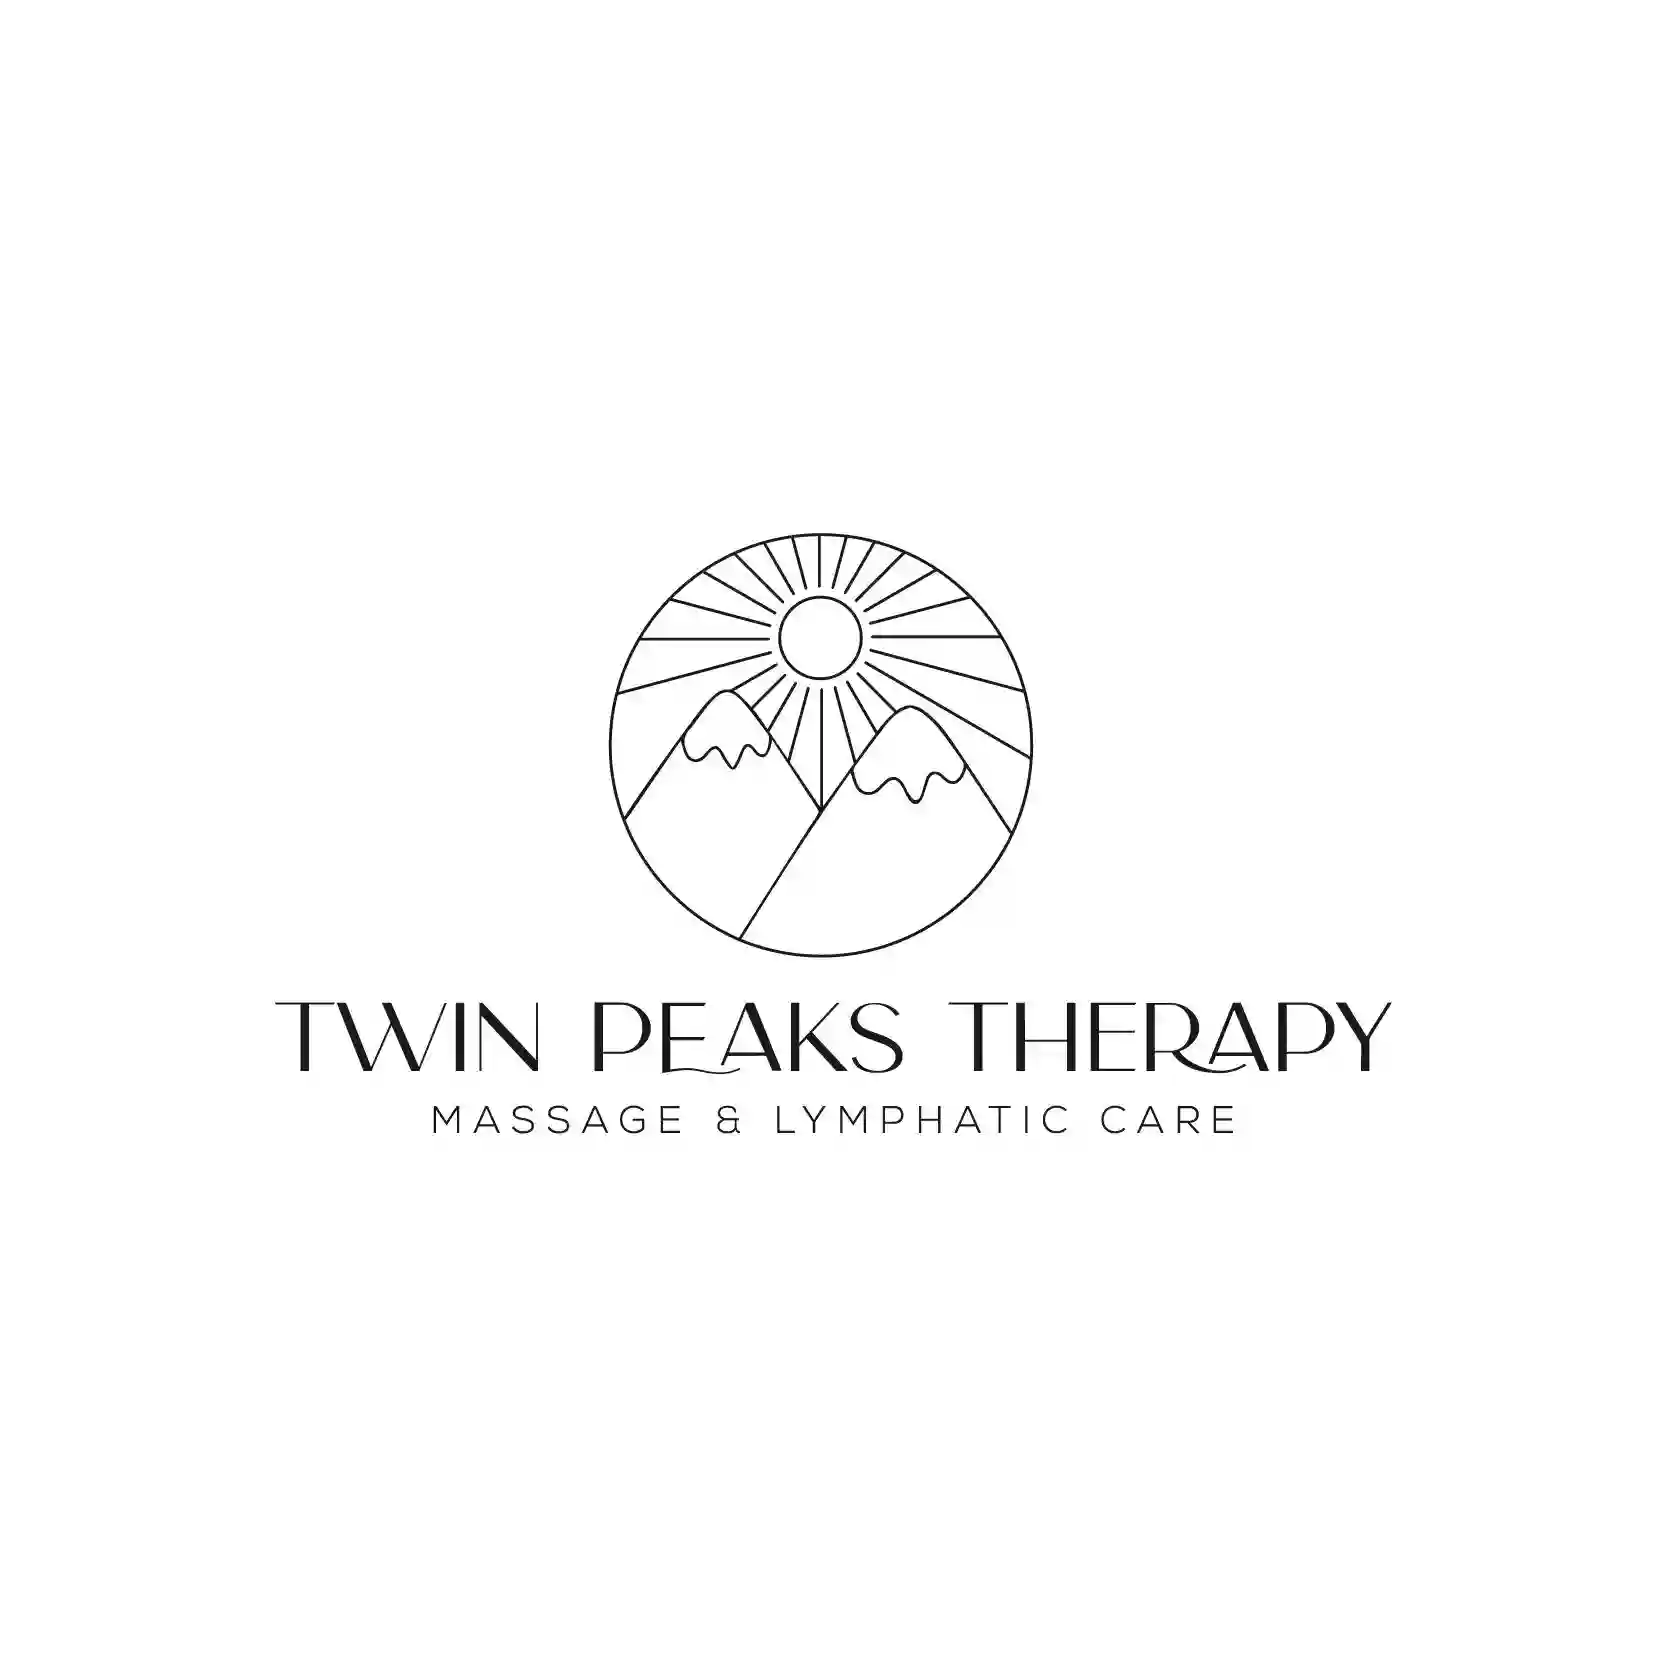 Twin Peaks Therapy